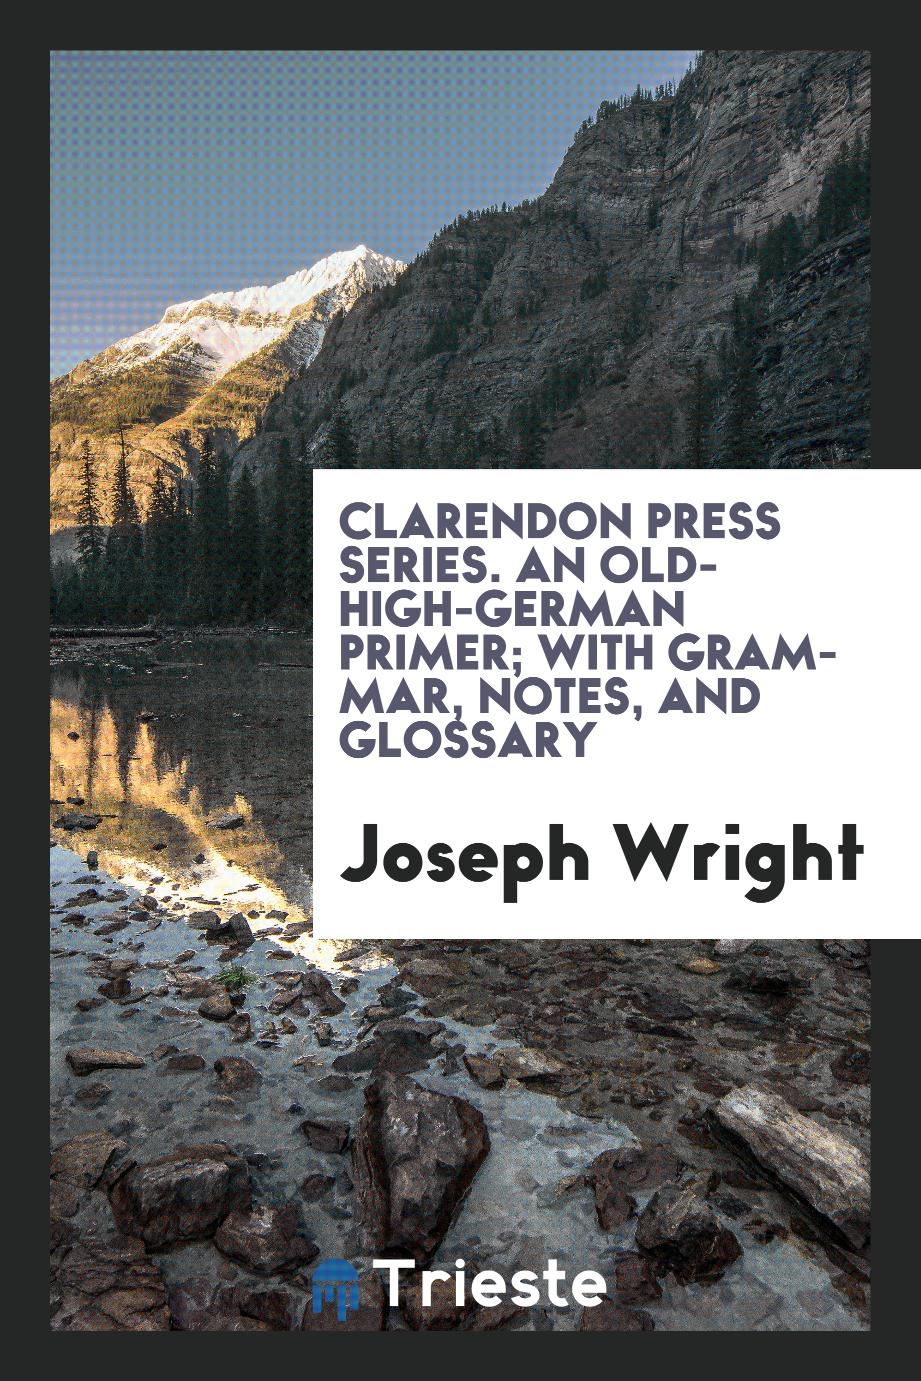 Clarendon press series. An Old-High-German primer; with grammar, notes, and glossary